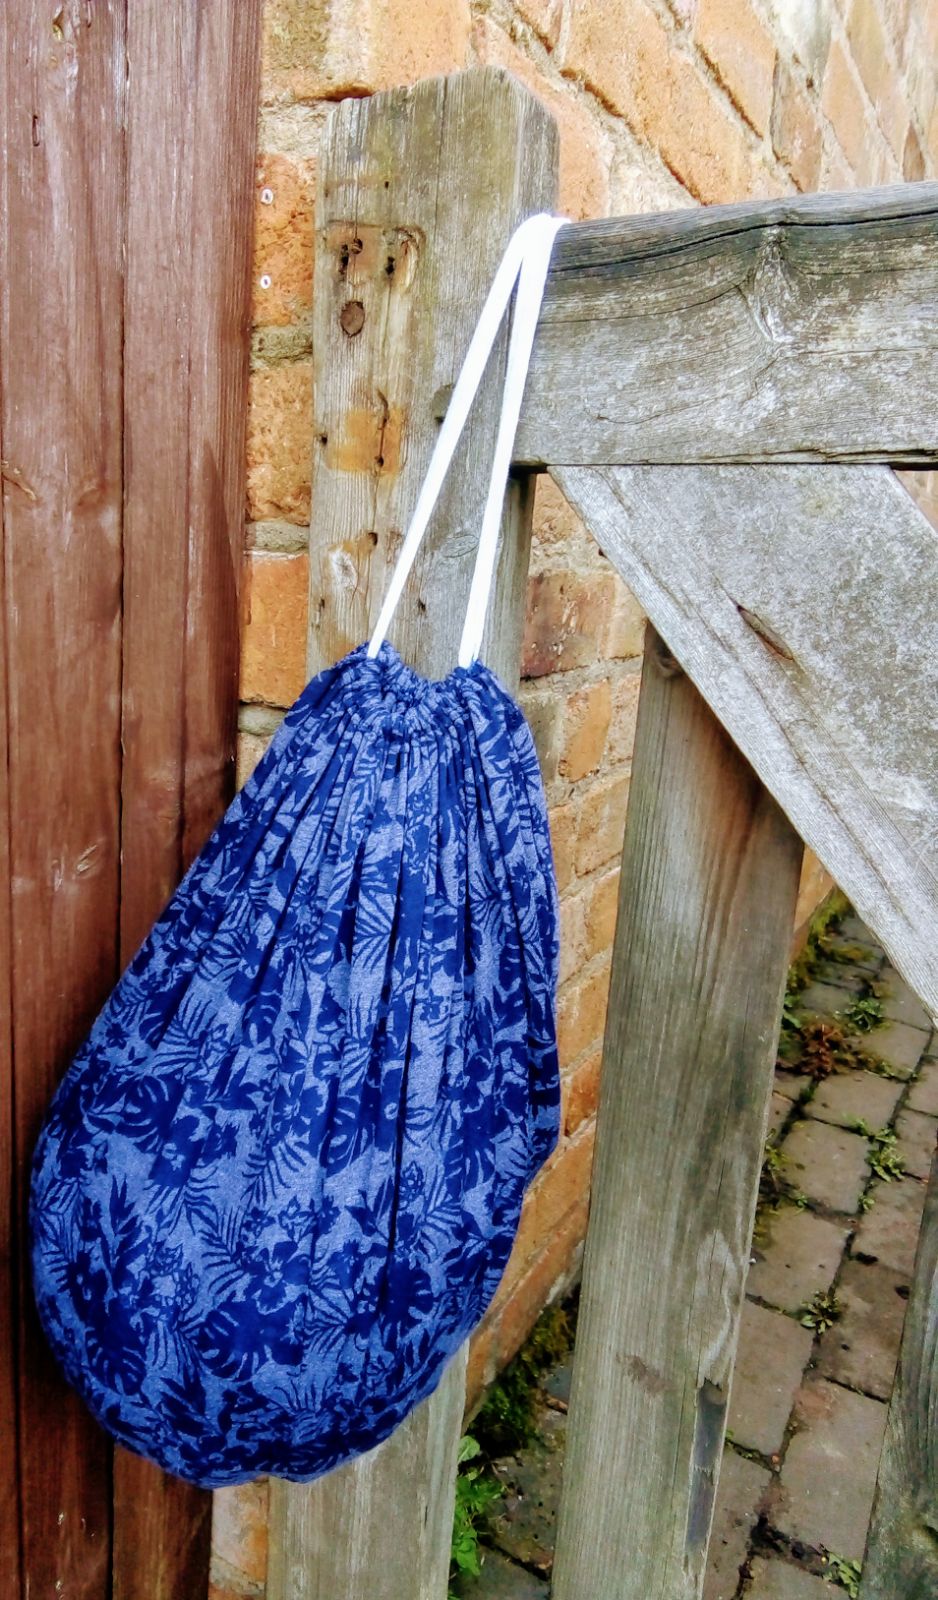 Drawstring bag made out of an old t-shirt